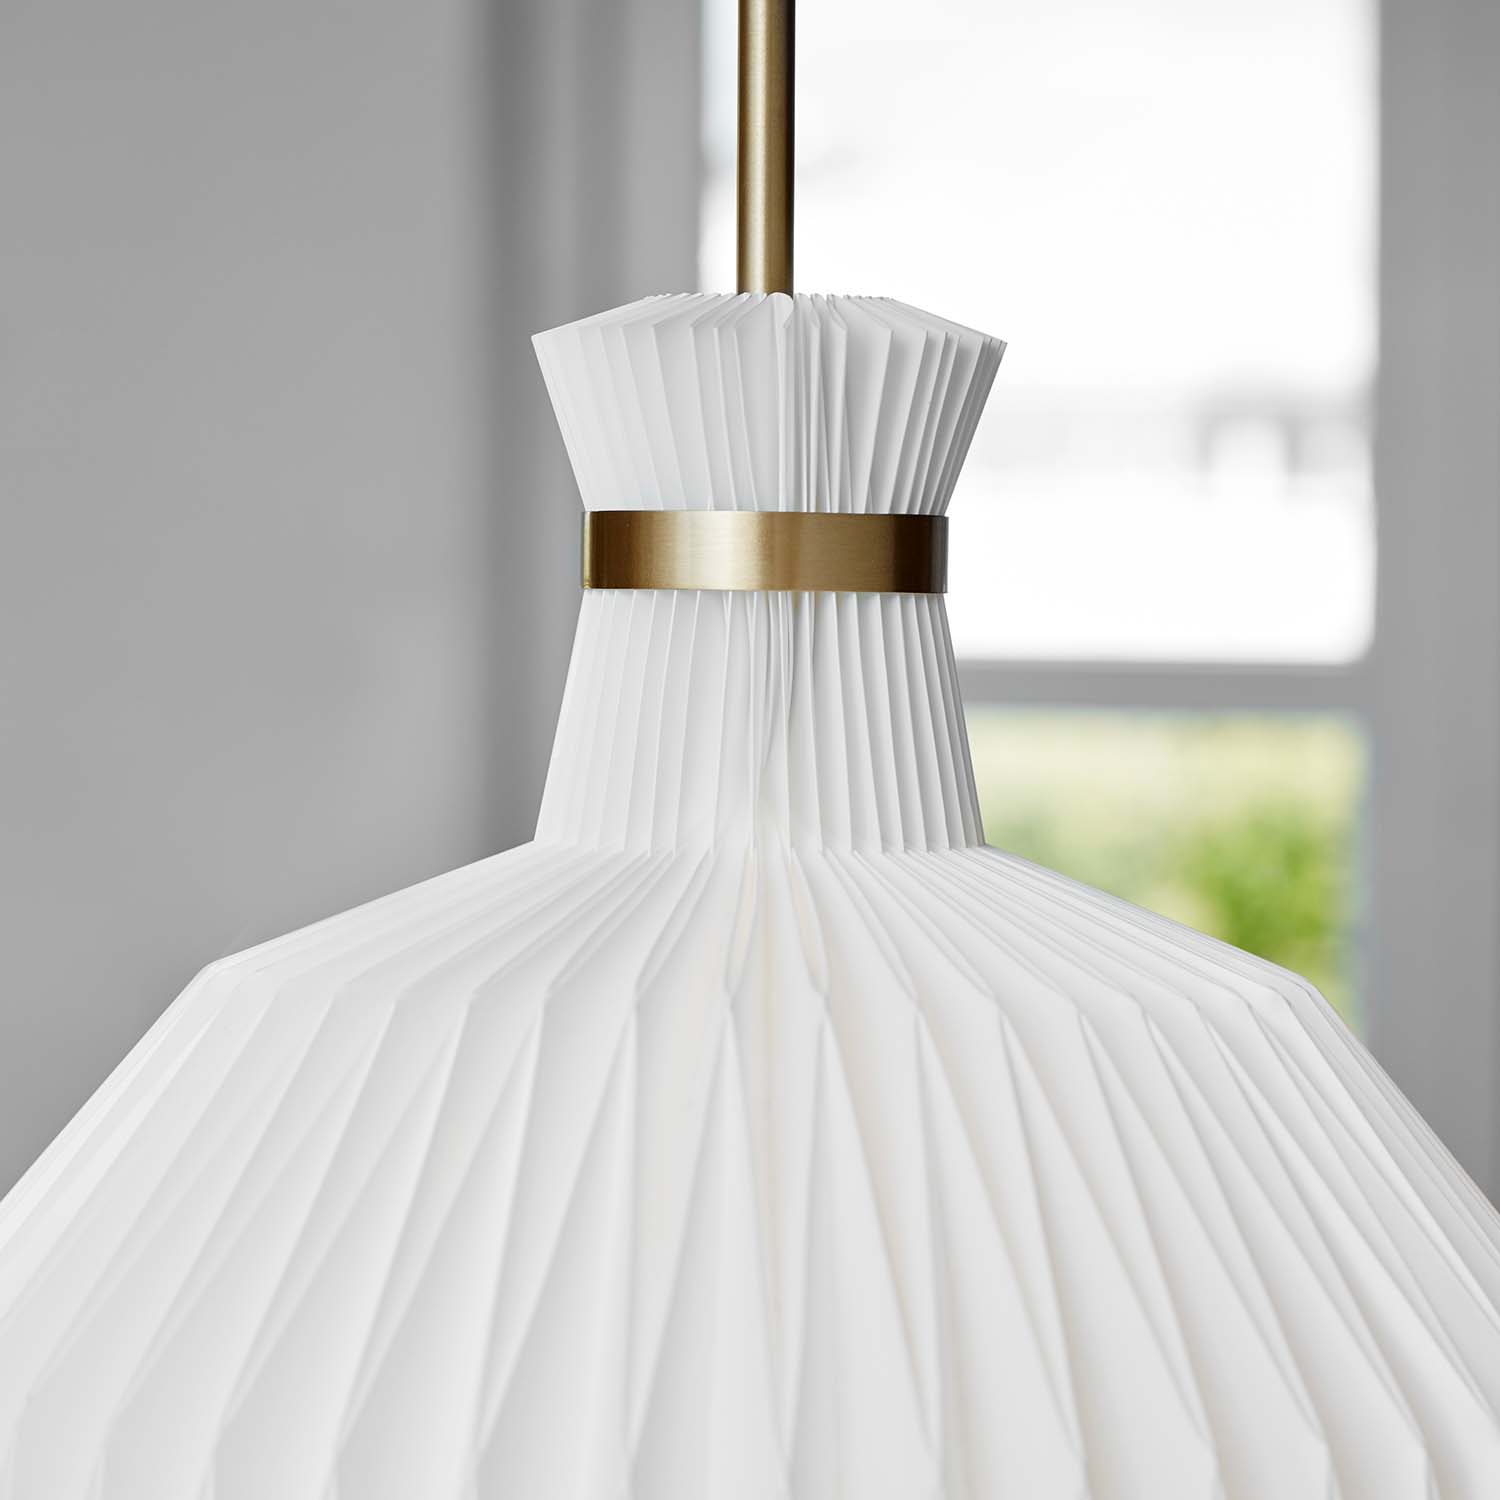 CLASSIC 101 - Handcrafted white pleated design ball pendant light